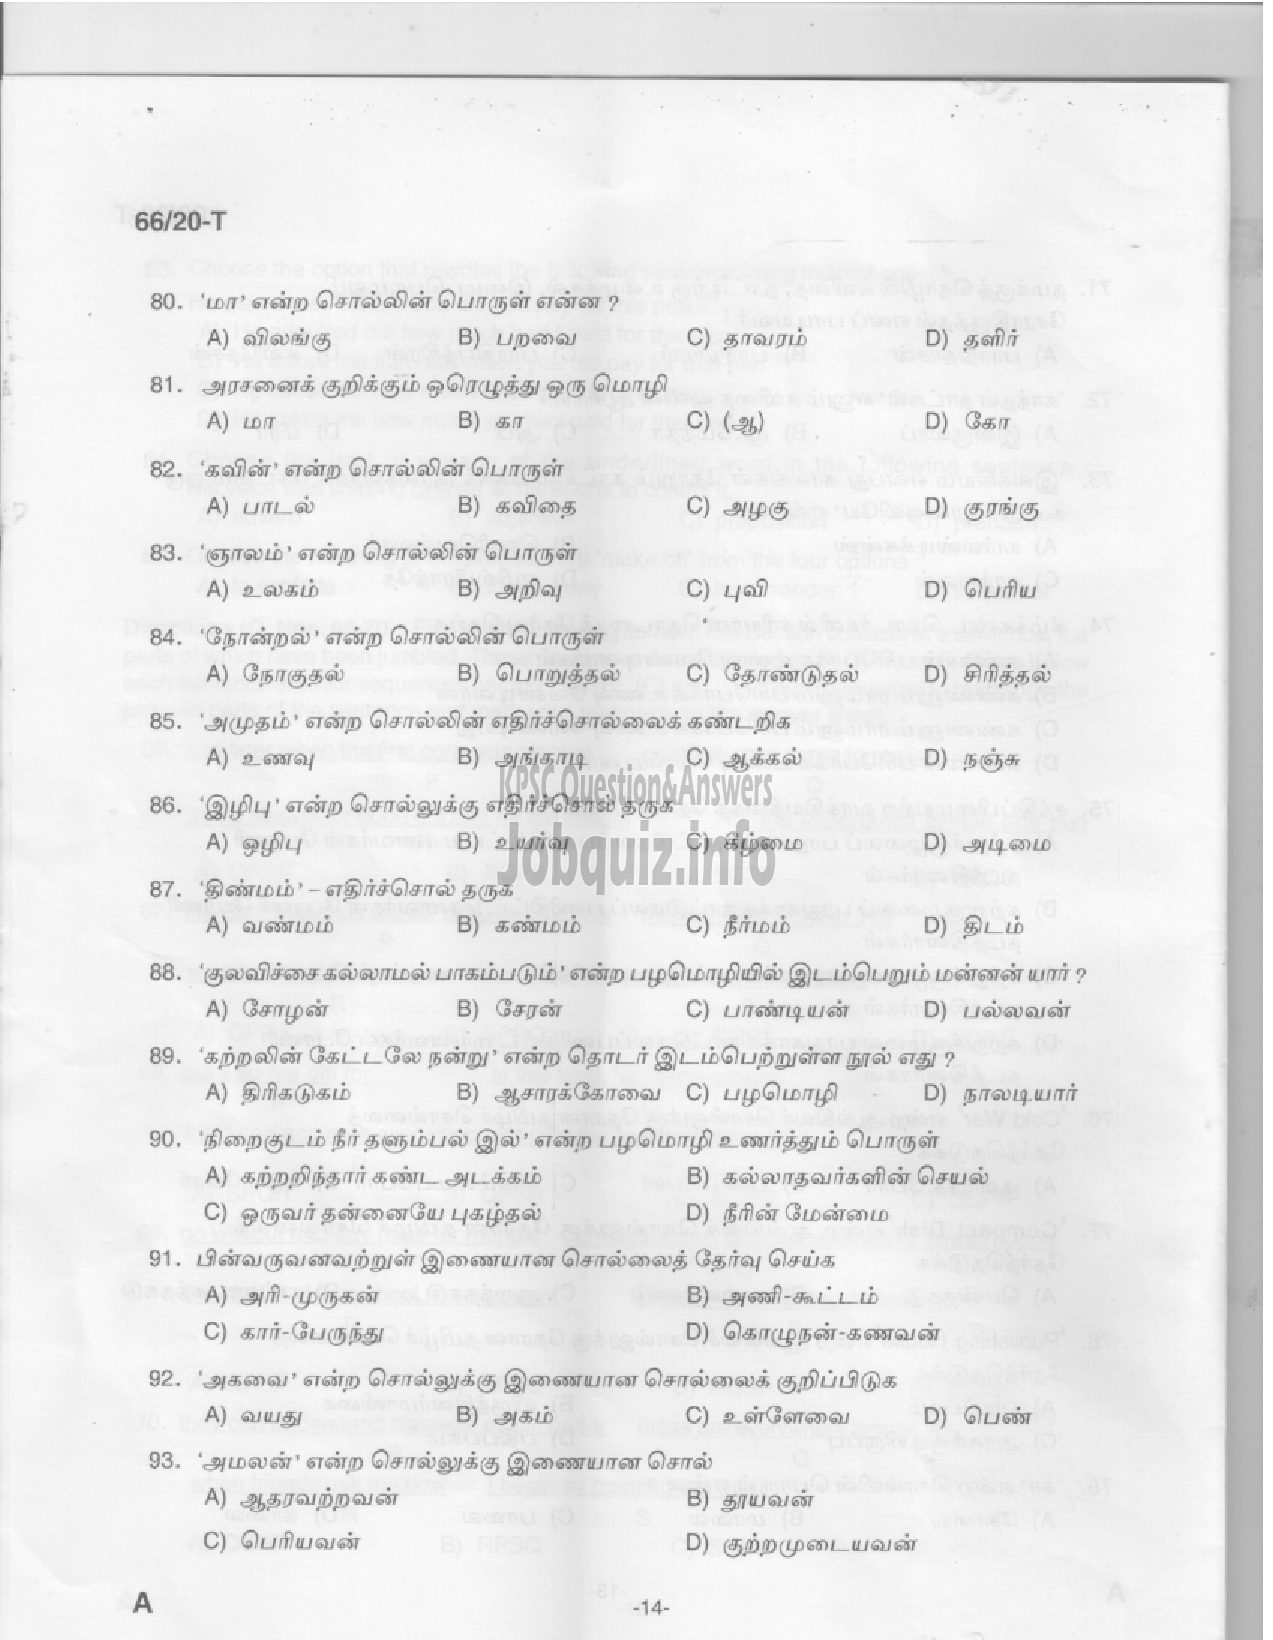 Kerala PSC Question Paper -  KAS Officer in Kerala Administrative Service (Supplimentary exam for Gazetted teaching staff in Education Department) (PAPER II) -14